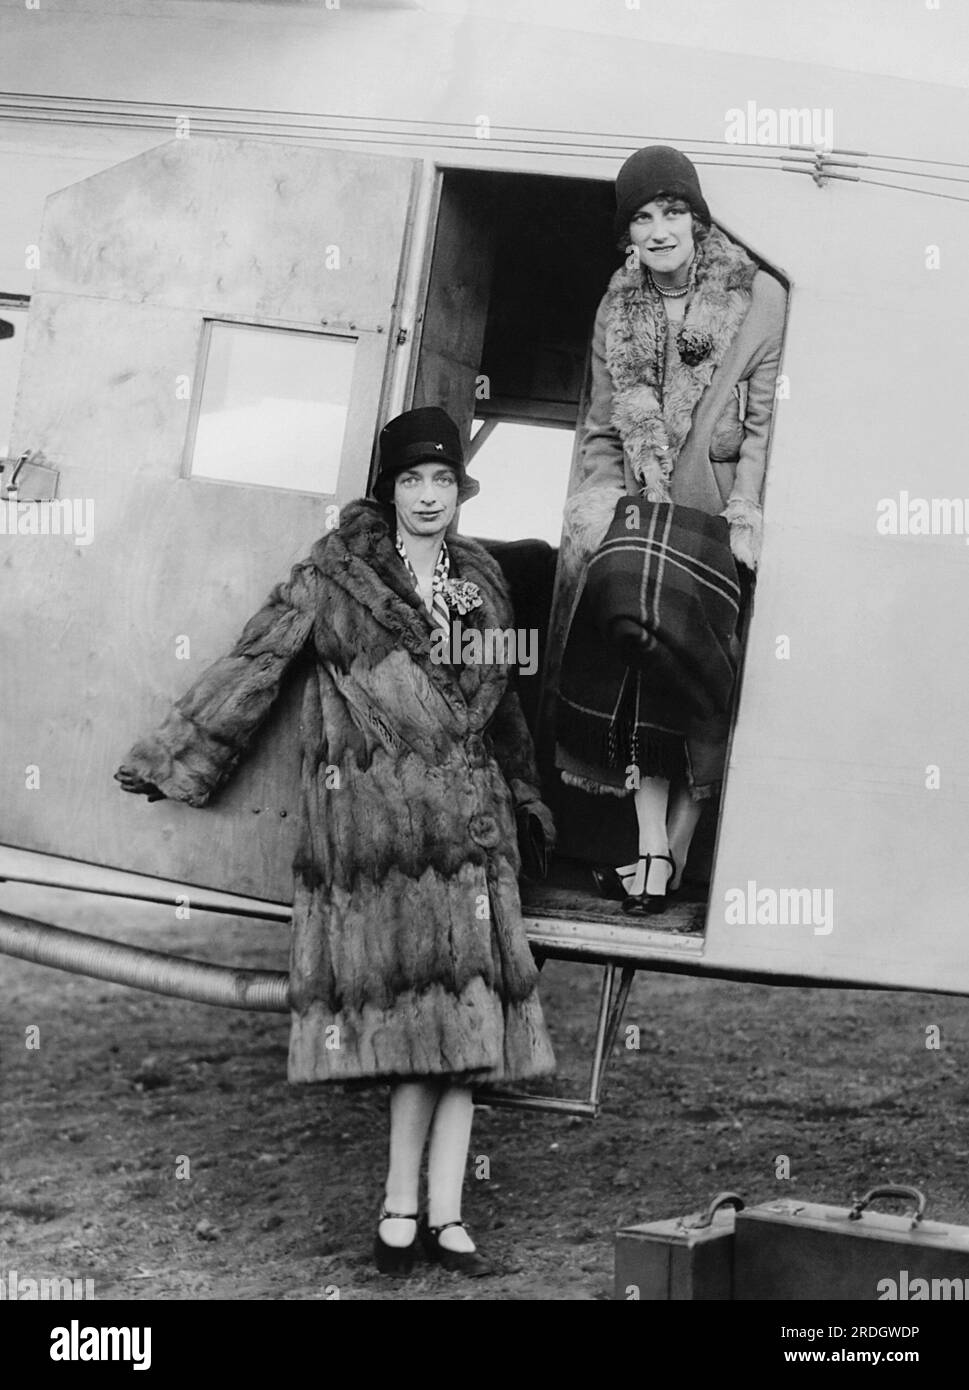 New York, New York:  April 5, 1927 The official opening of the airline  passenger service between Boston and New York took place when the first two women to make the night trip alighted from the air mail plane in New York. The fare was $25 per person. Stock Photo